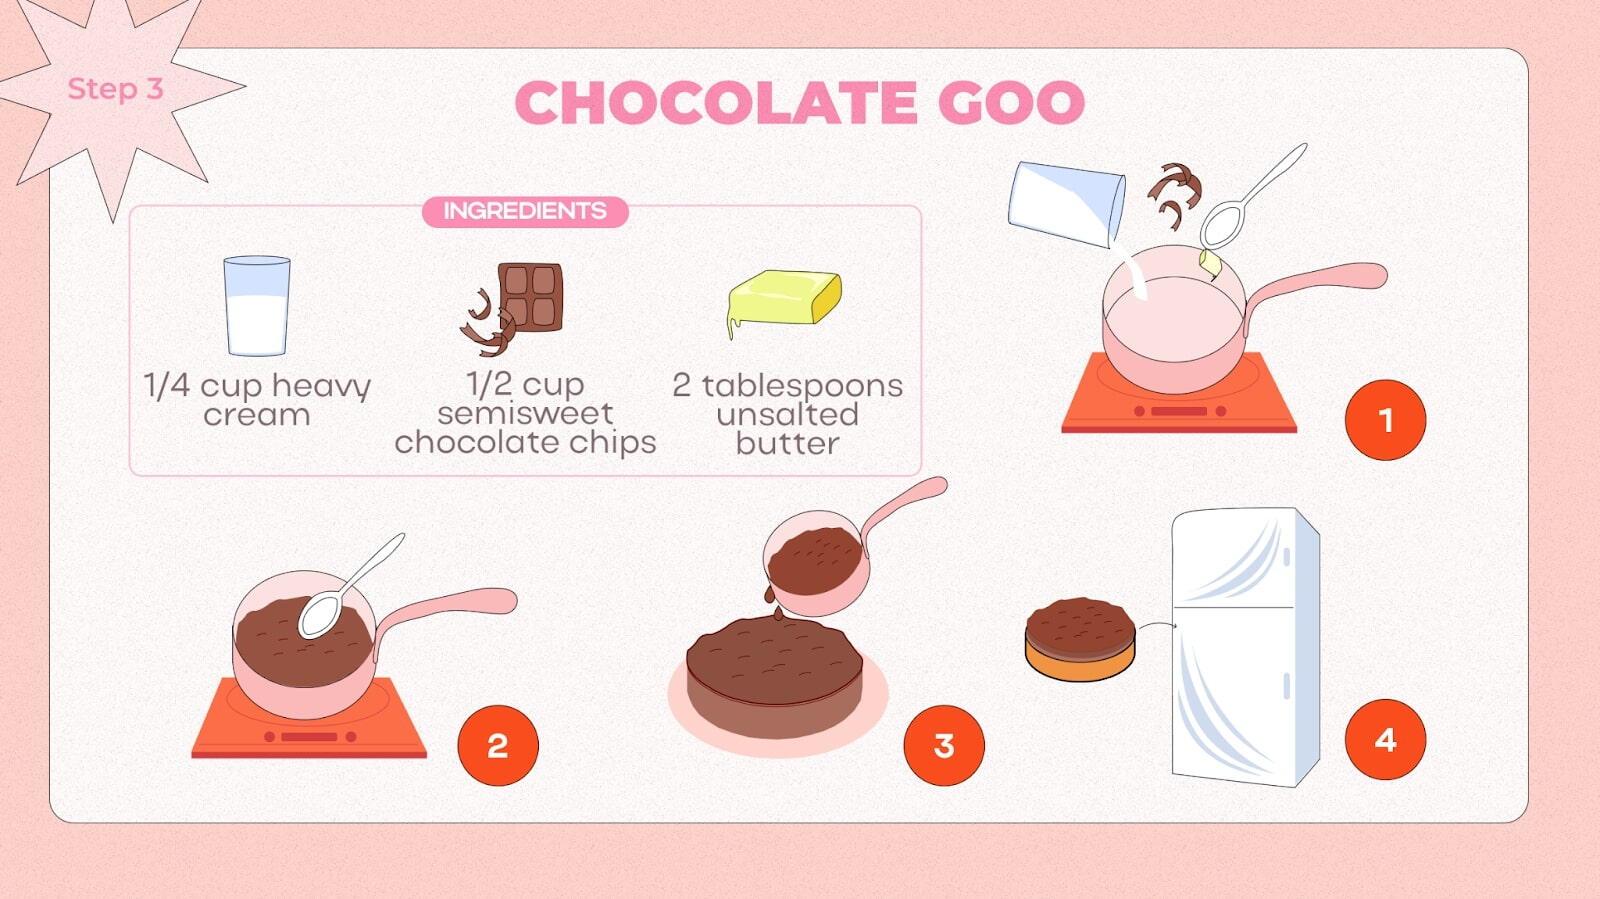 Instruction for make the Chocolate Goo